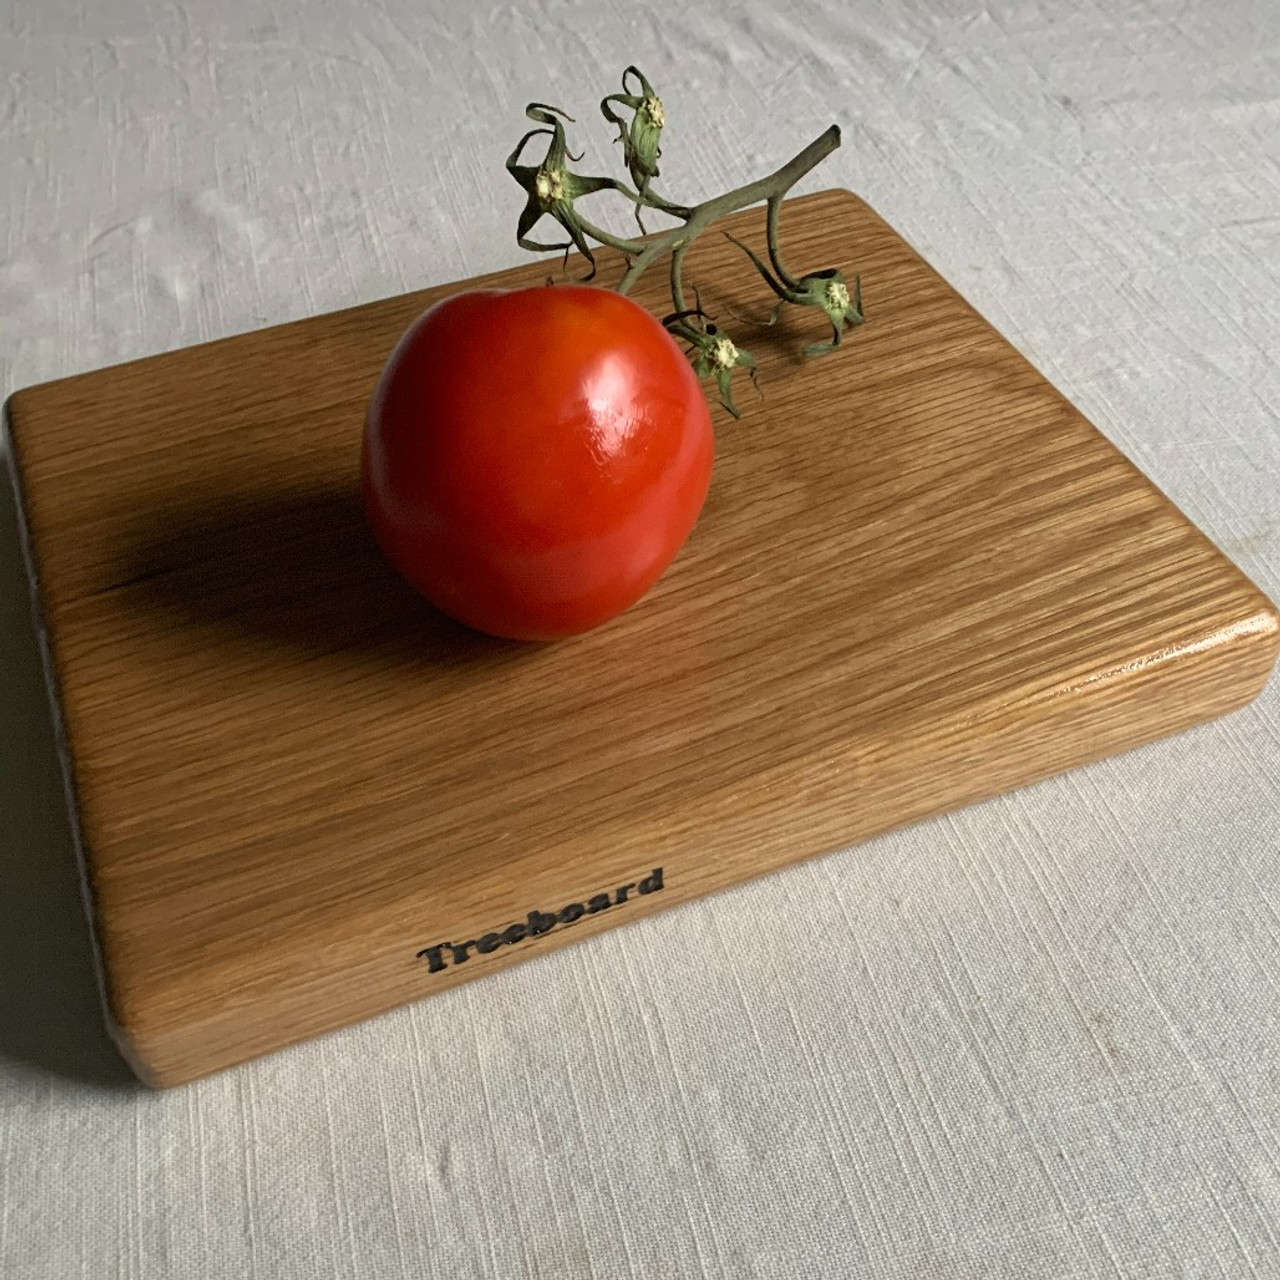 https://cdn11.bigcommerce.com/s-1vey7r6116/images/stencil/1280x1280/products/130/498/small-white-oak-cutting-board-by-Treeboard-tomato__55086.1669344772.jpg?c=1